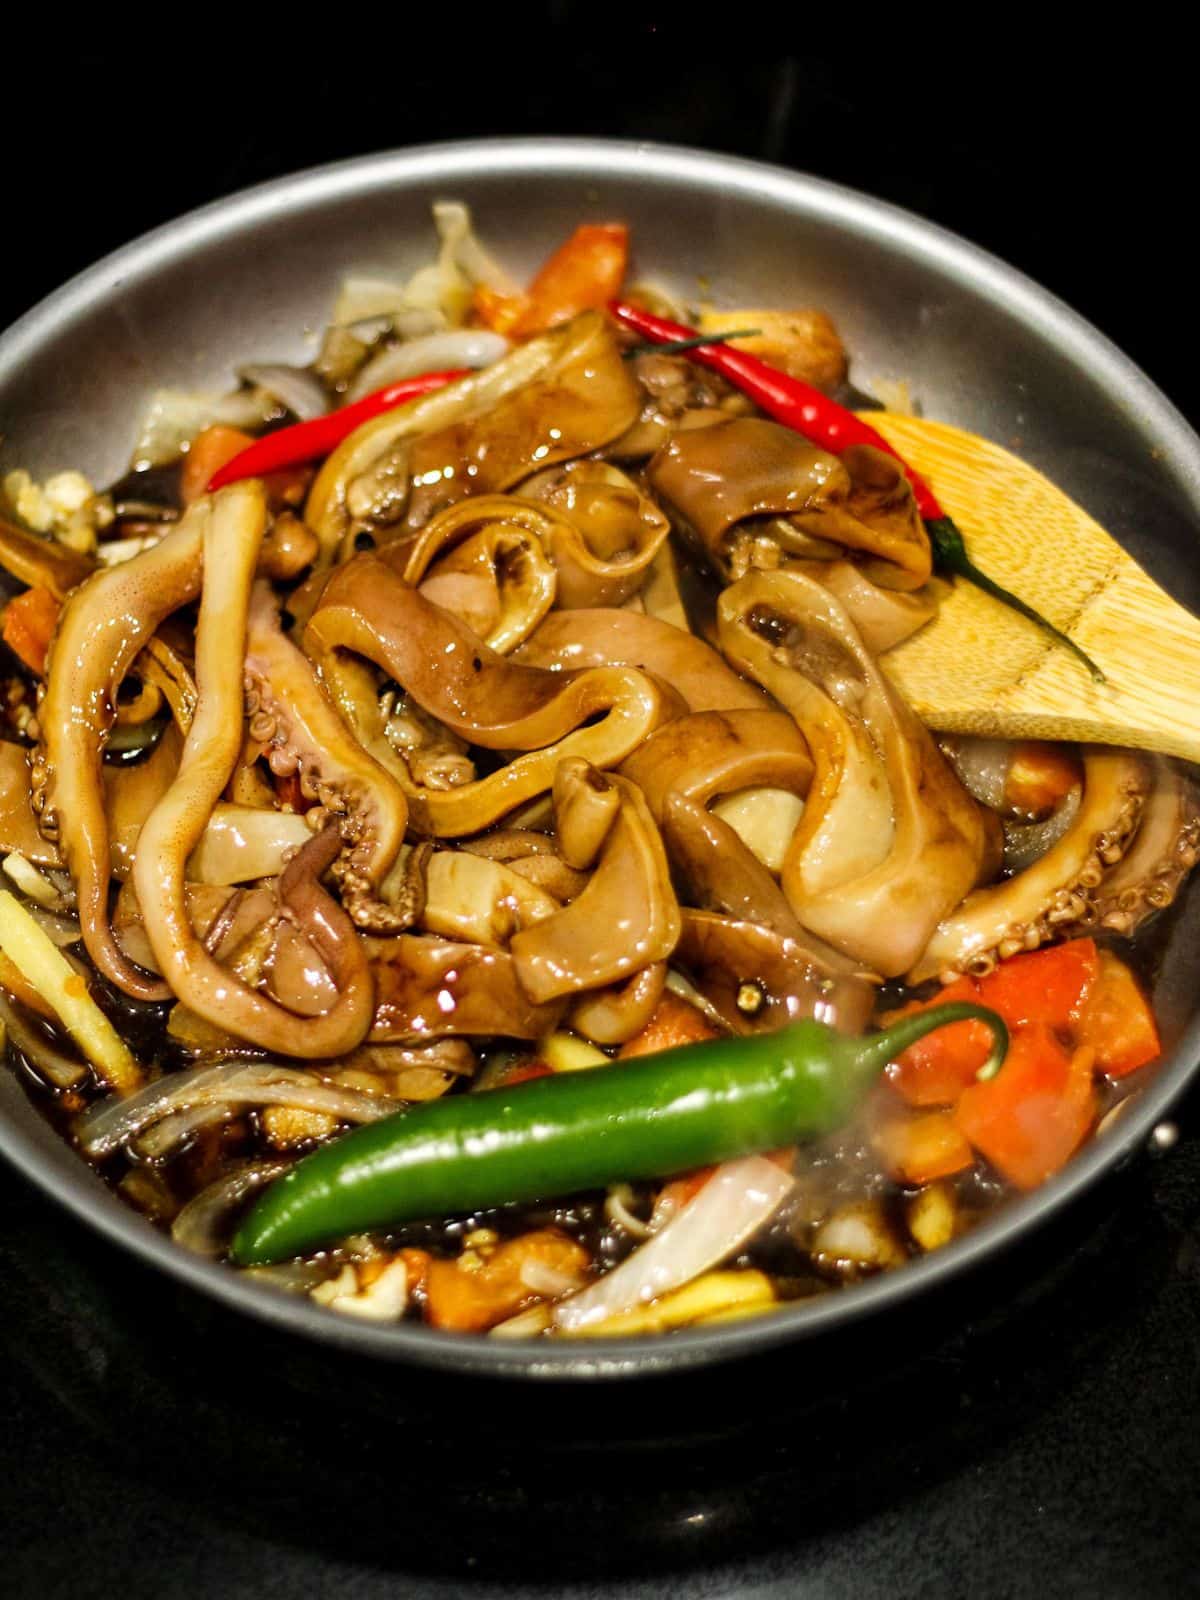 Adding marinated squid in the skillet.